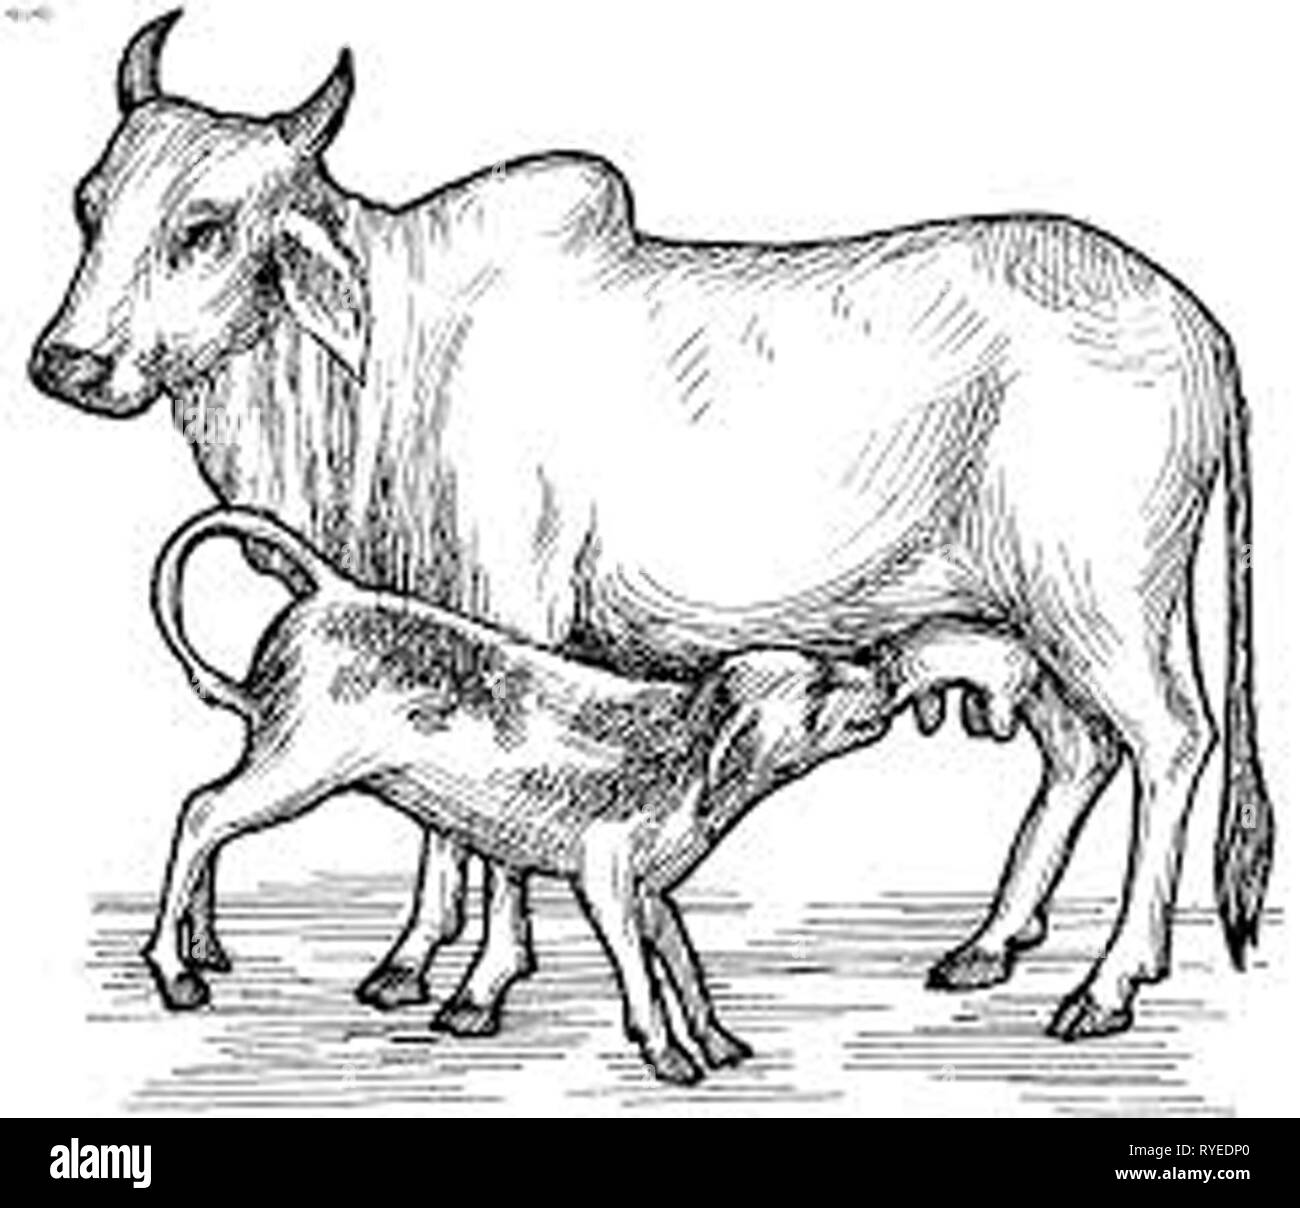 Vintage illustration of cow/s Stock Photo